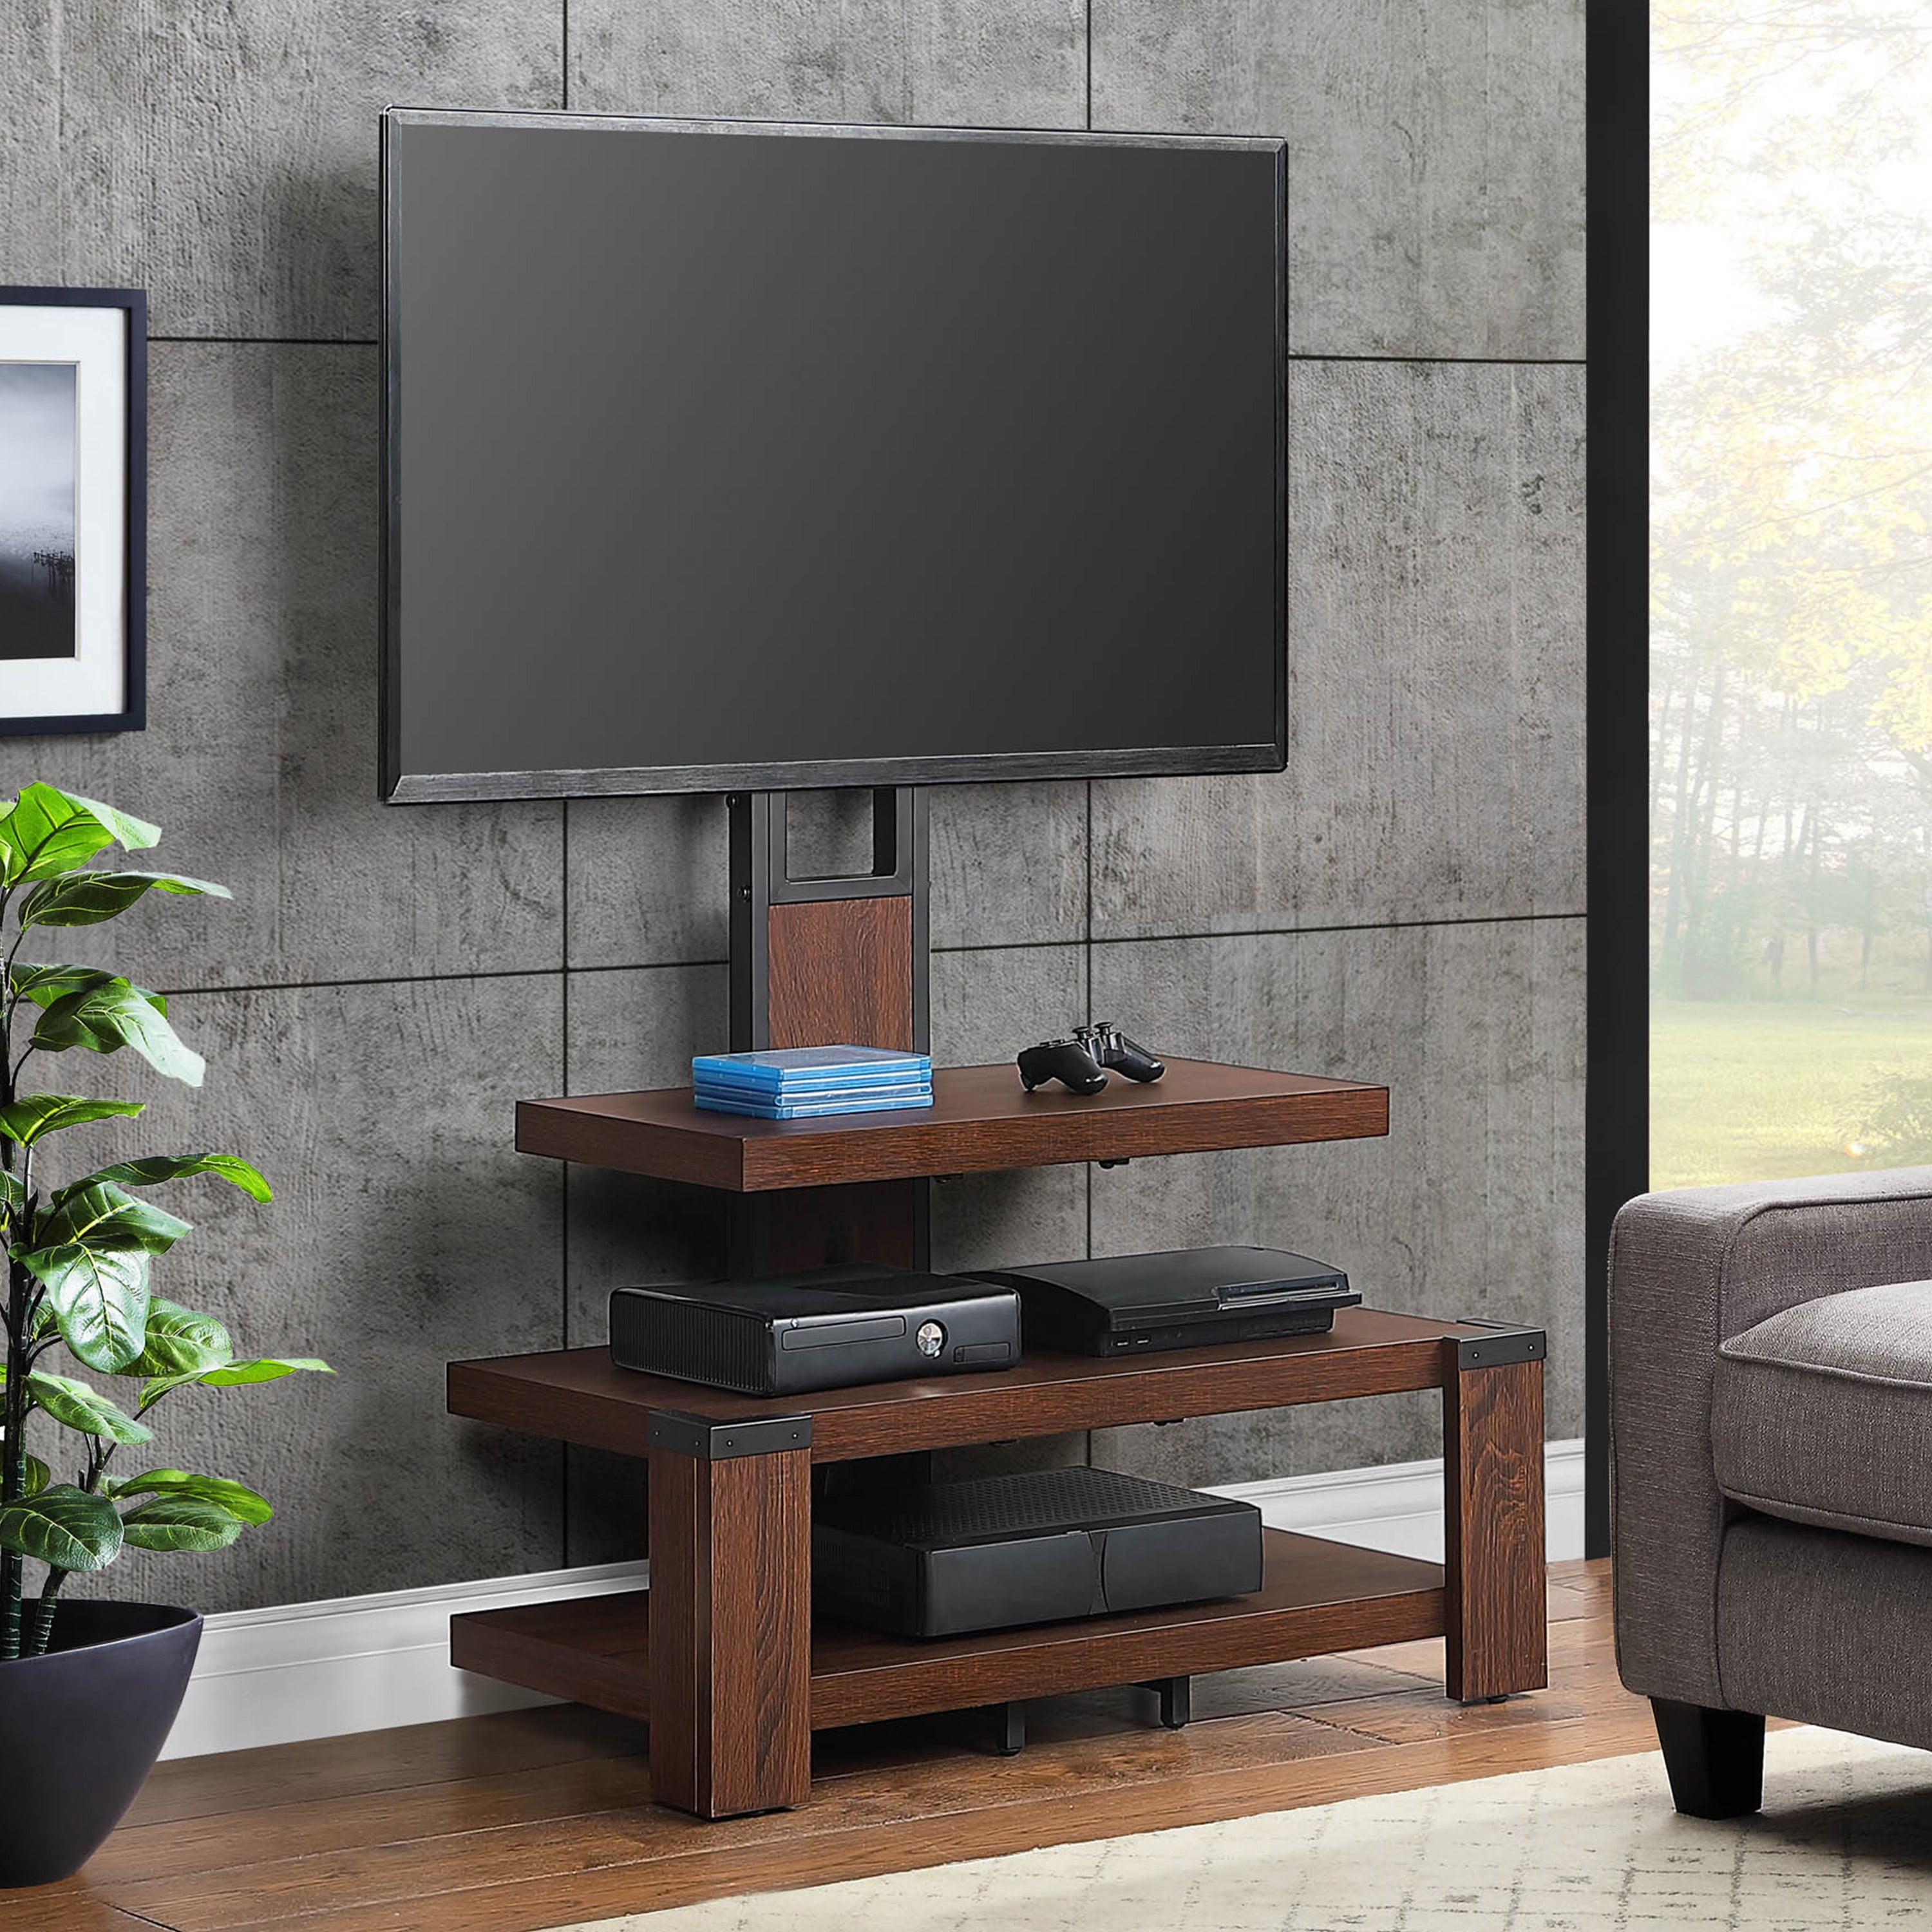 Whalen 3 Shelf Television Stand With Floater Mount For Tvs Up To 55